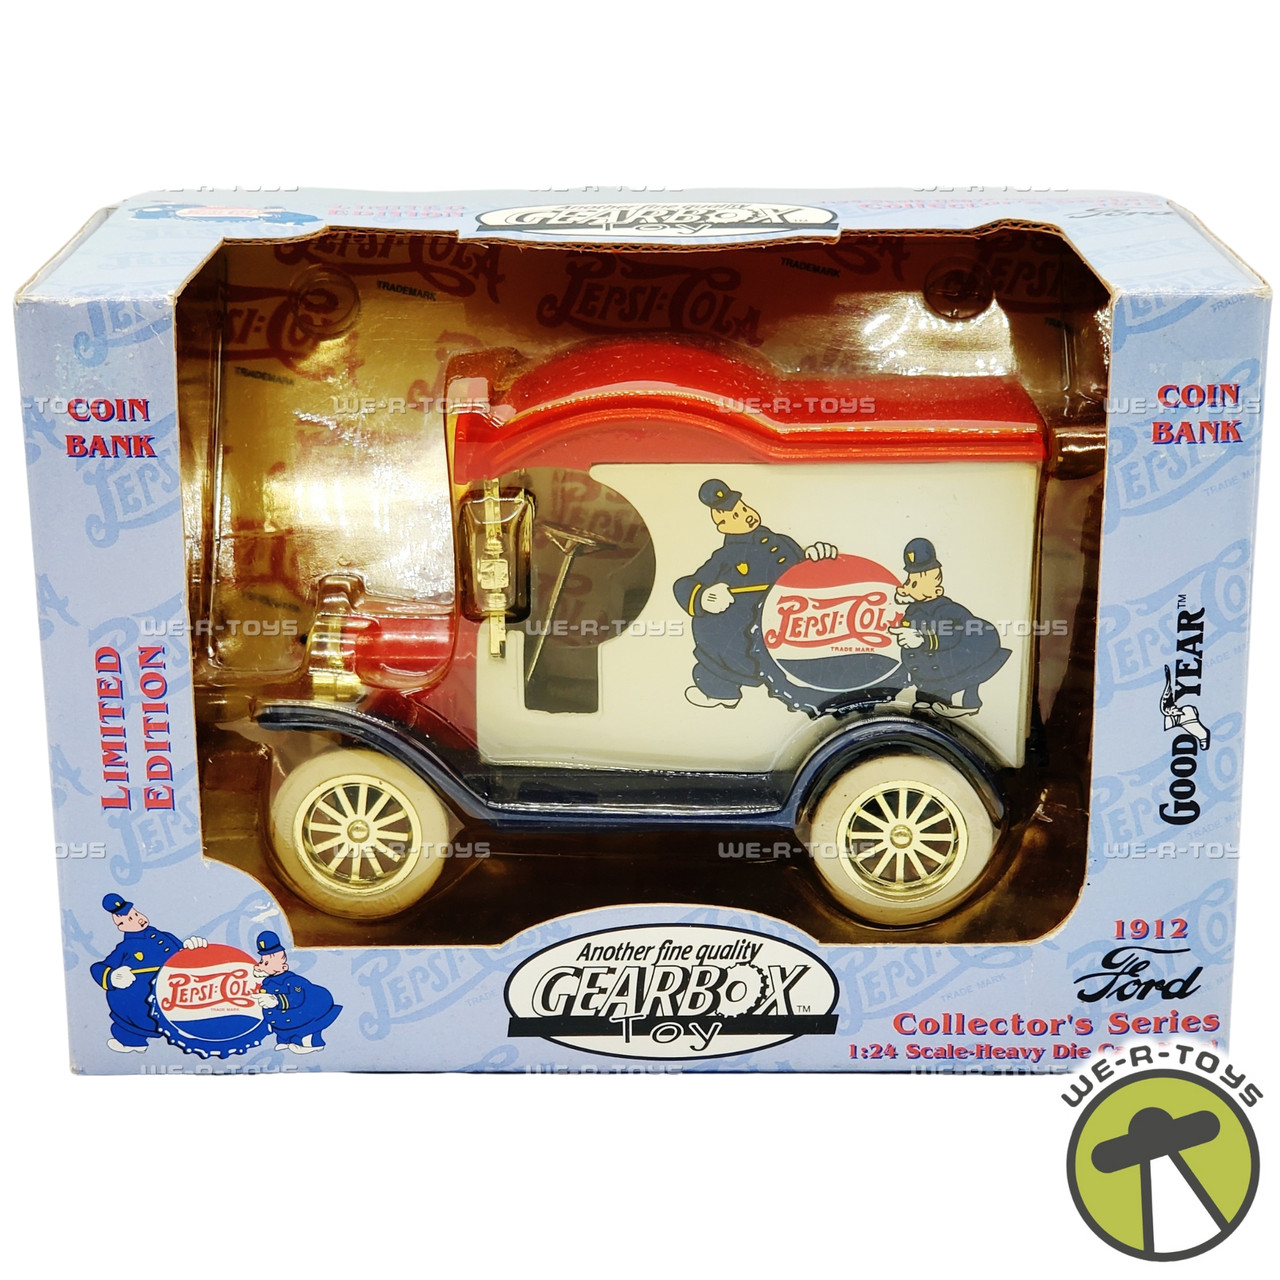 Pepsi Cola 1912 Ford Delivery Car Coin Bank 1:24 Scale 1996 Gearbox 76506  NEW